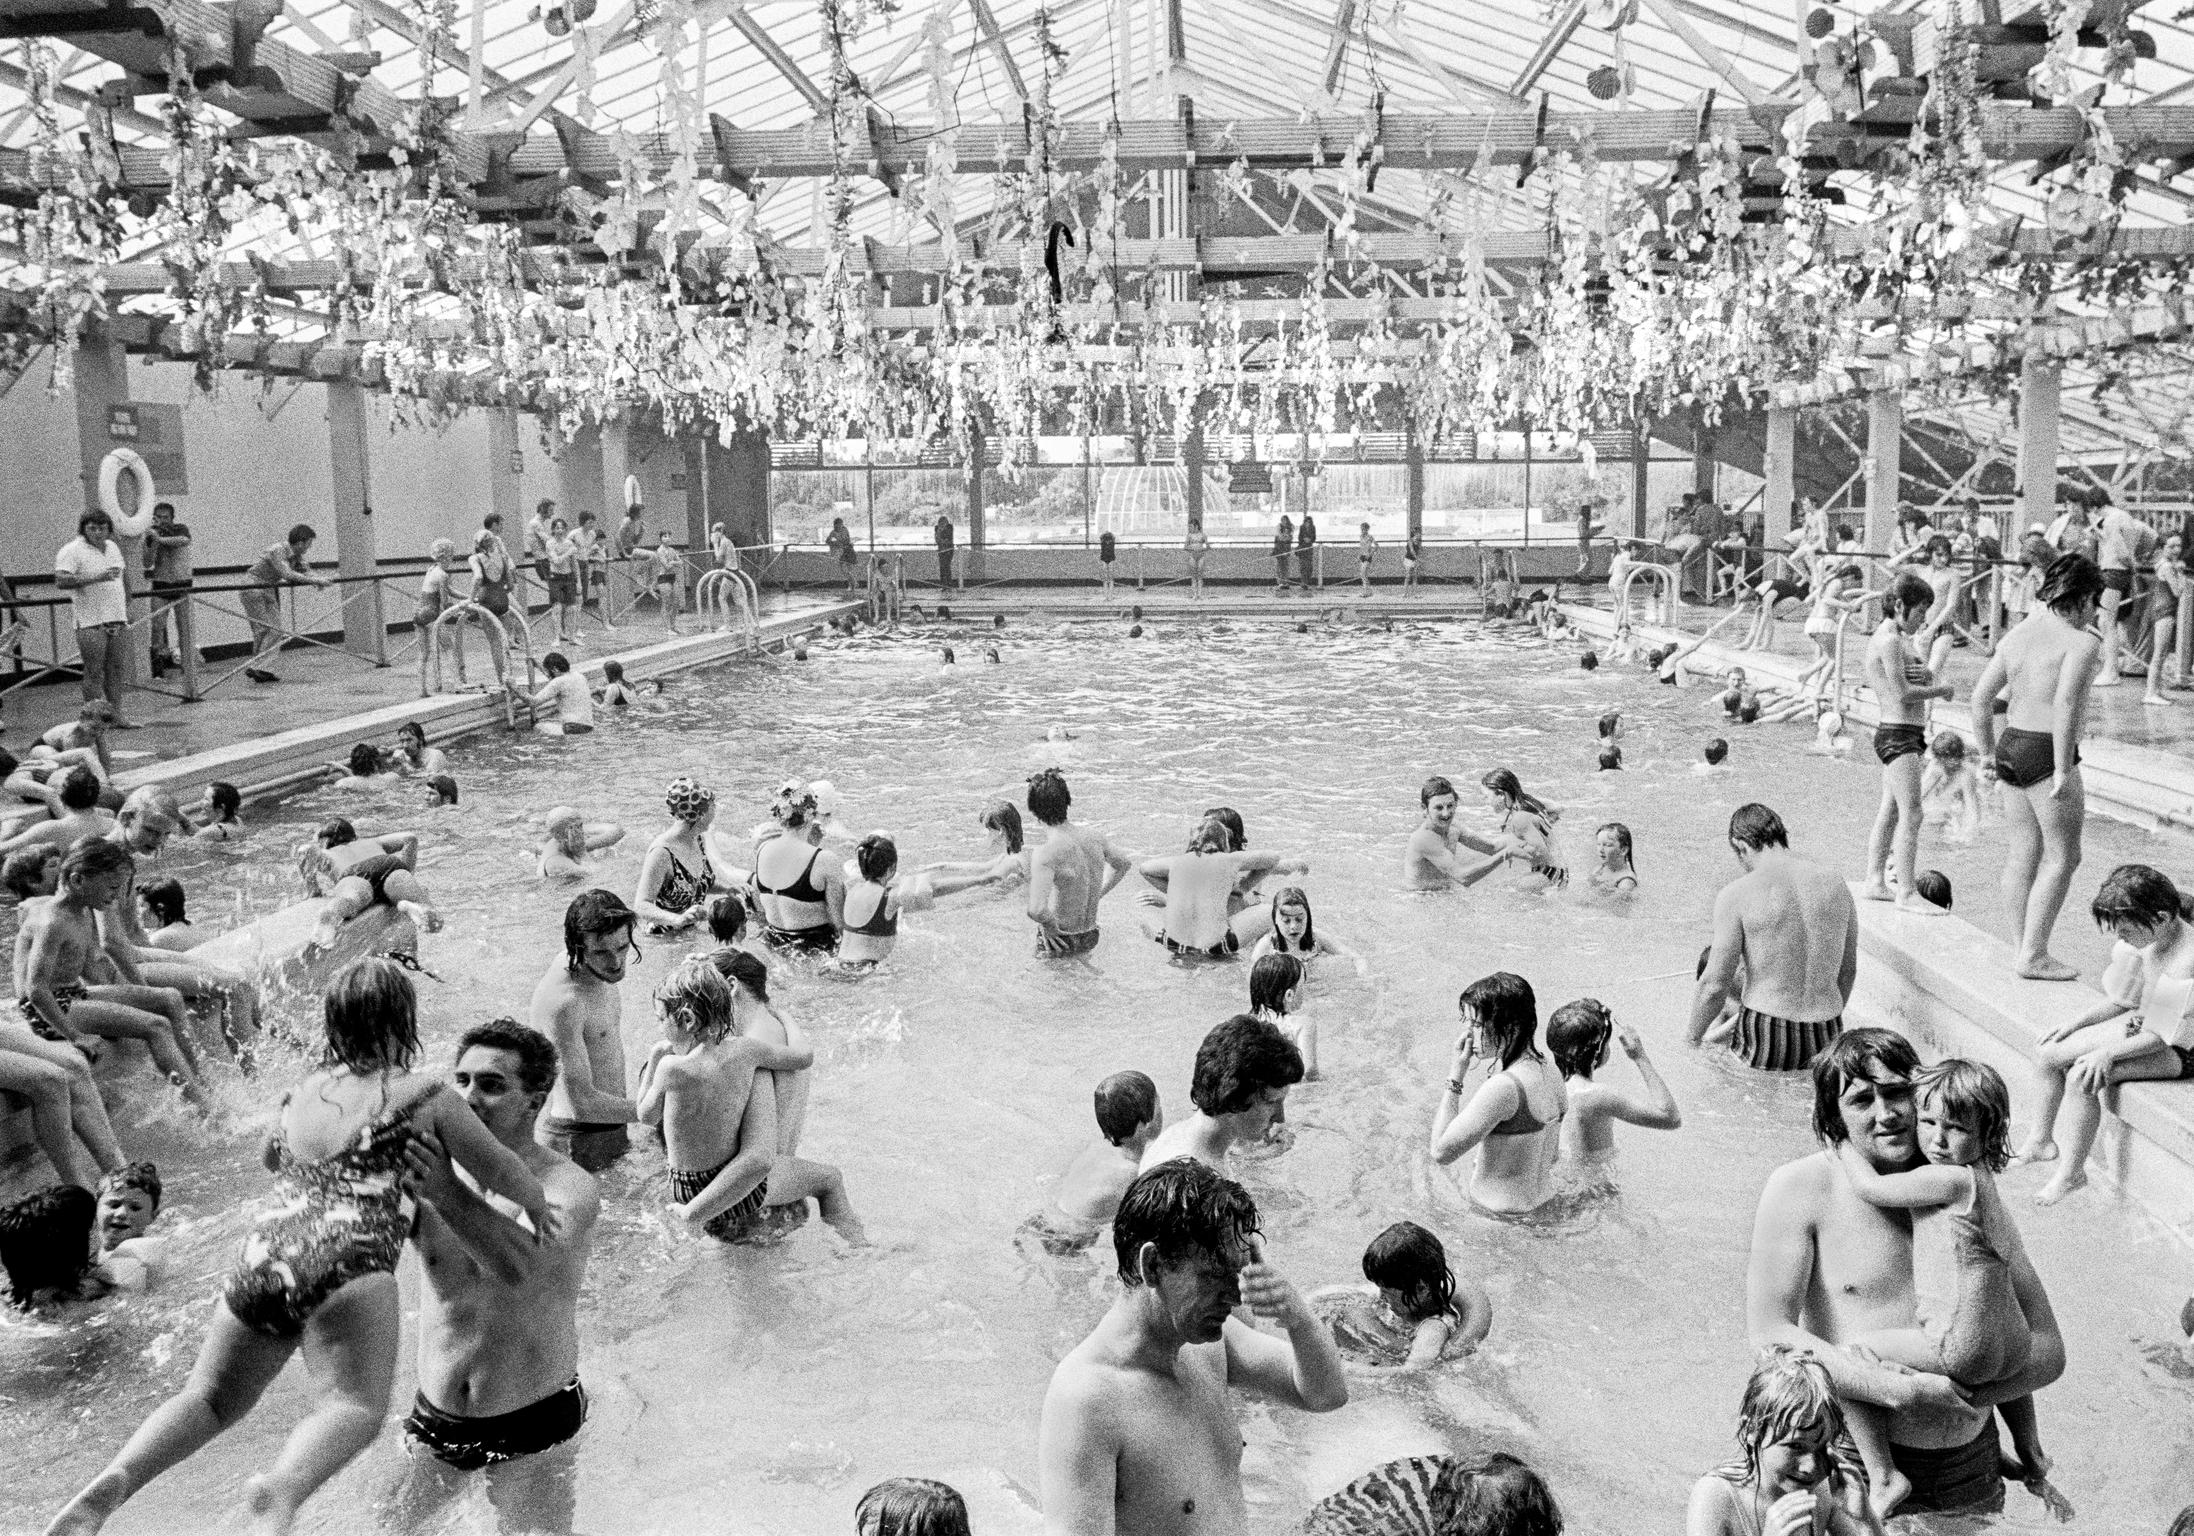 The indoor pool at Butlin's Holiday Camp. A wonderful idea allowing working class people to have cheap family holidays. Pwllheli, Wales